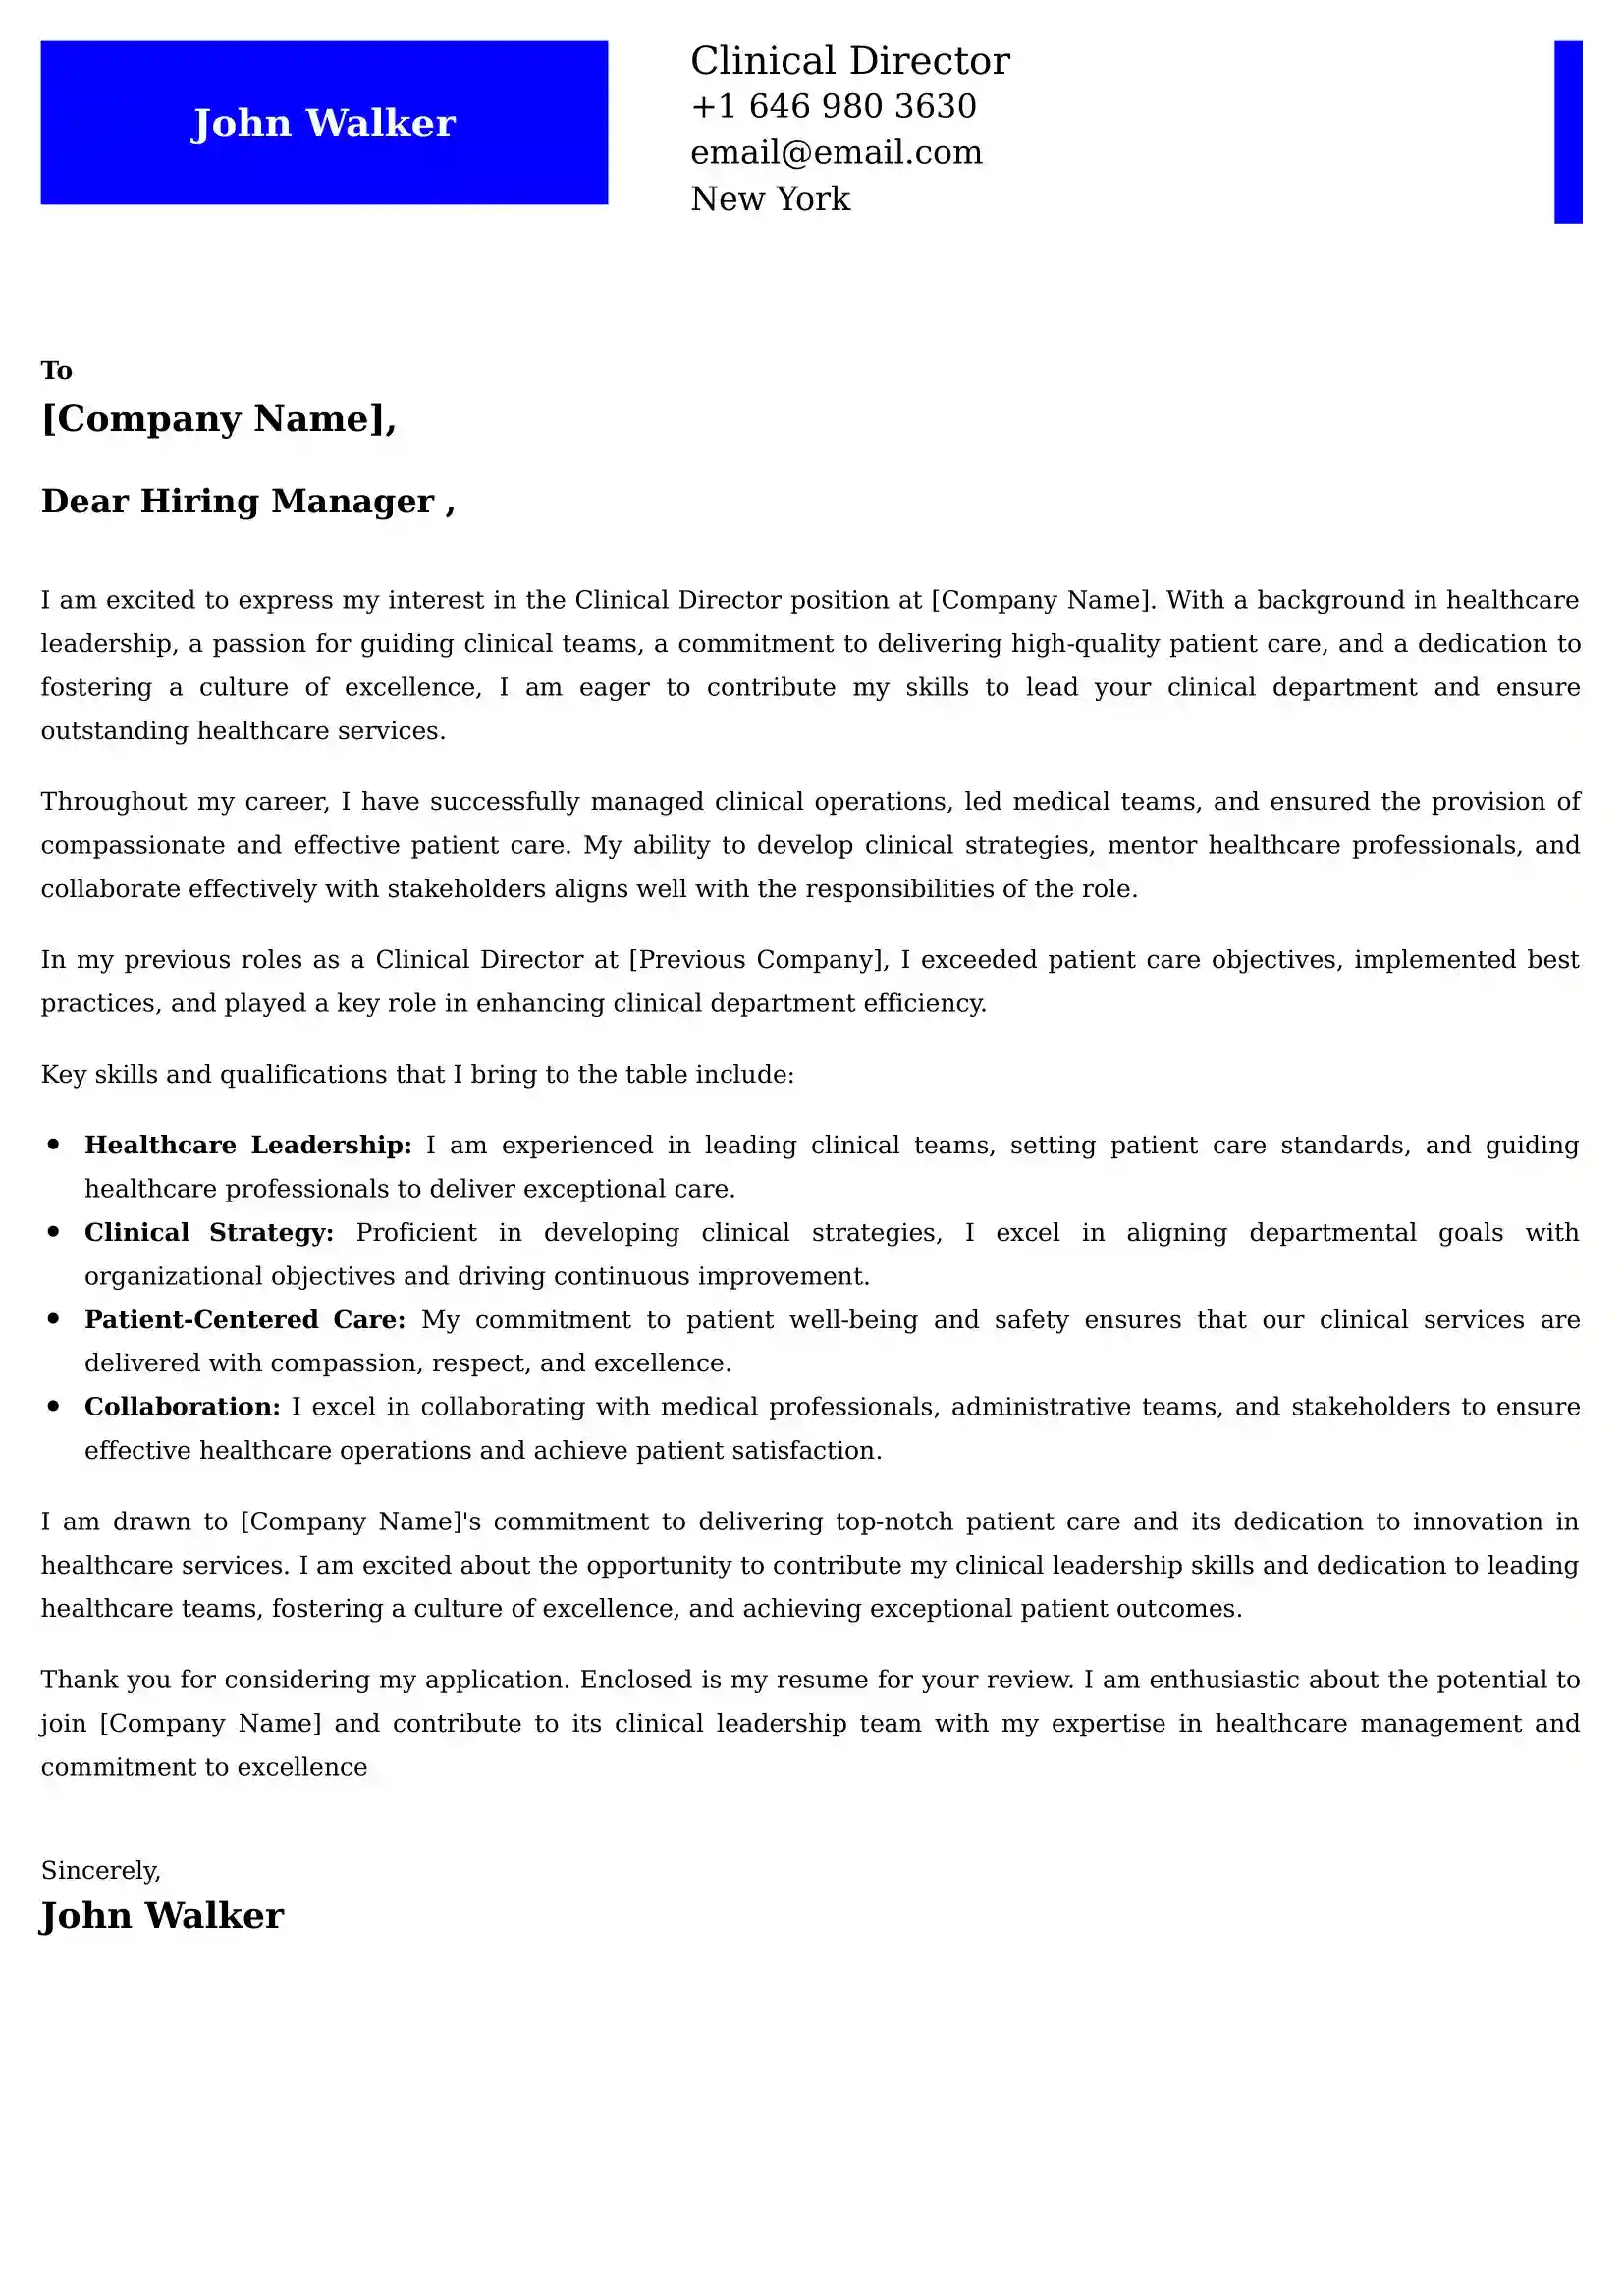 Clinical Director Cover Letter Examples -Latest Brazilian Templates